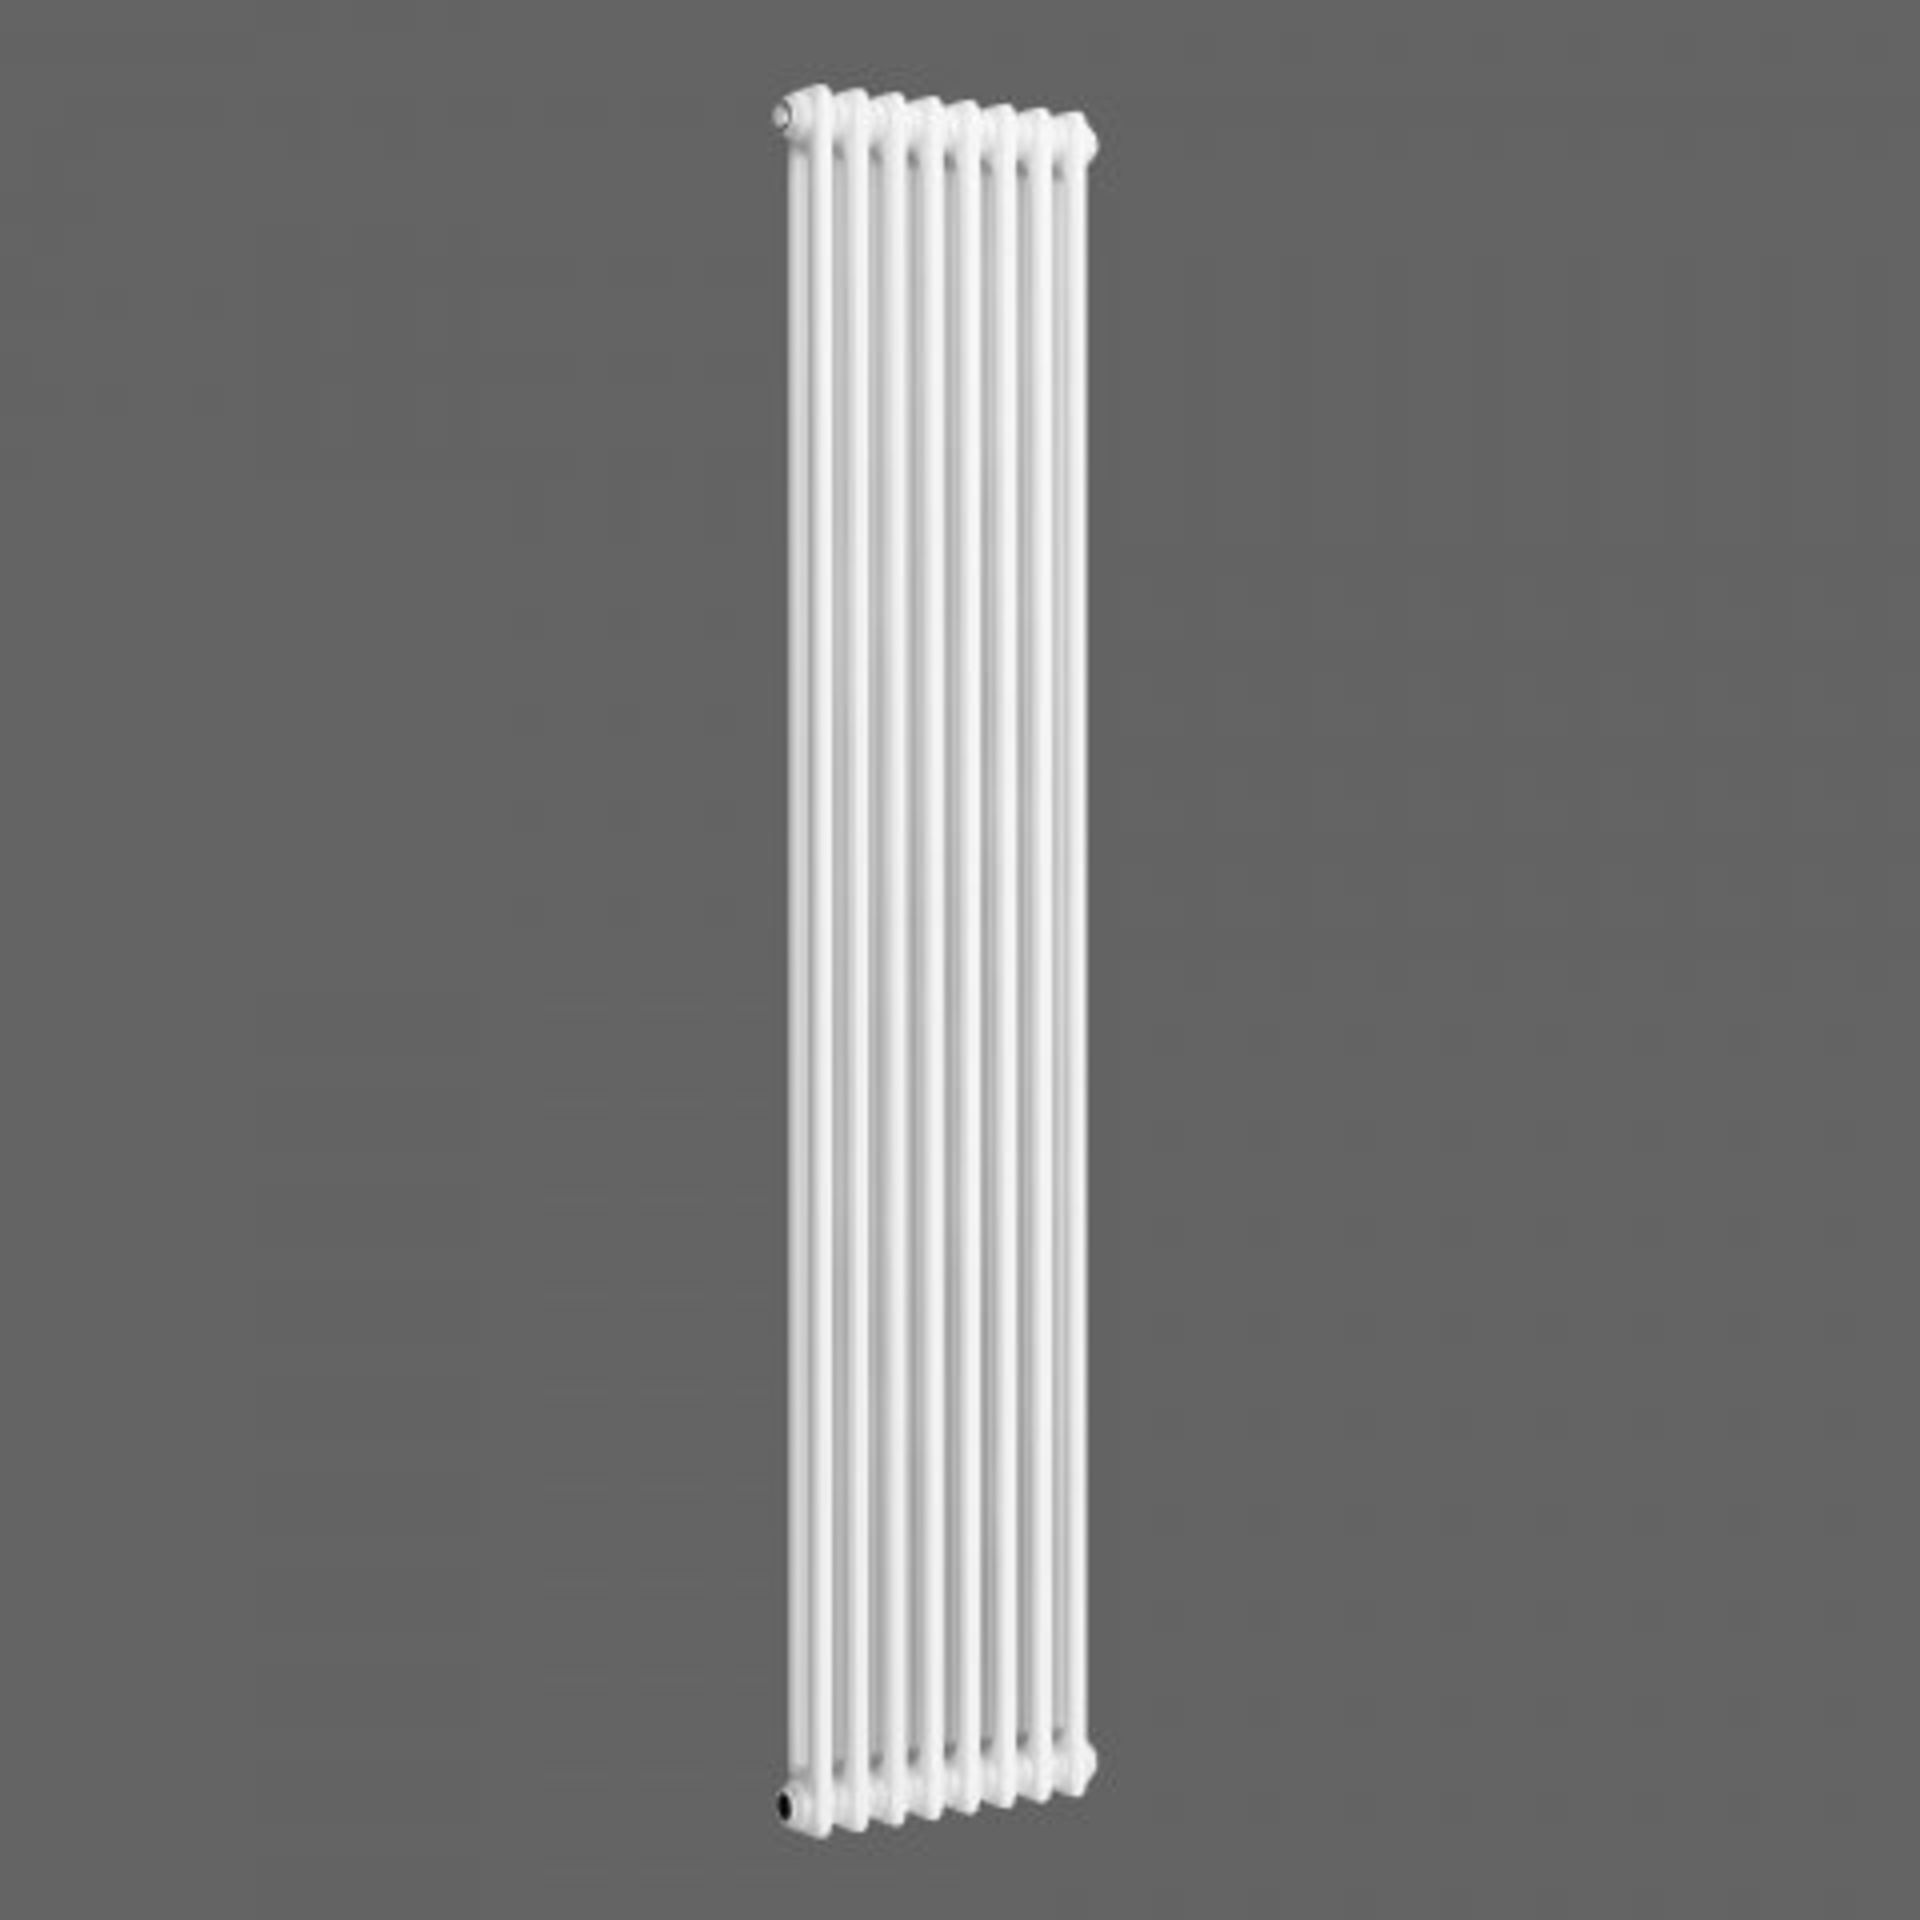 (XL25) 2000x300mm White Double Panel Vertical Colosseum Radiator Premium. RRP £499.99.Classic... - Image 3 of 3